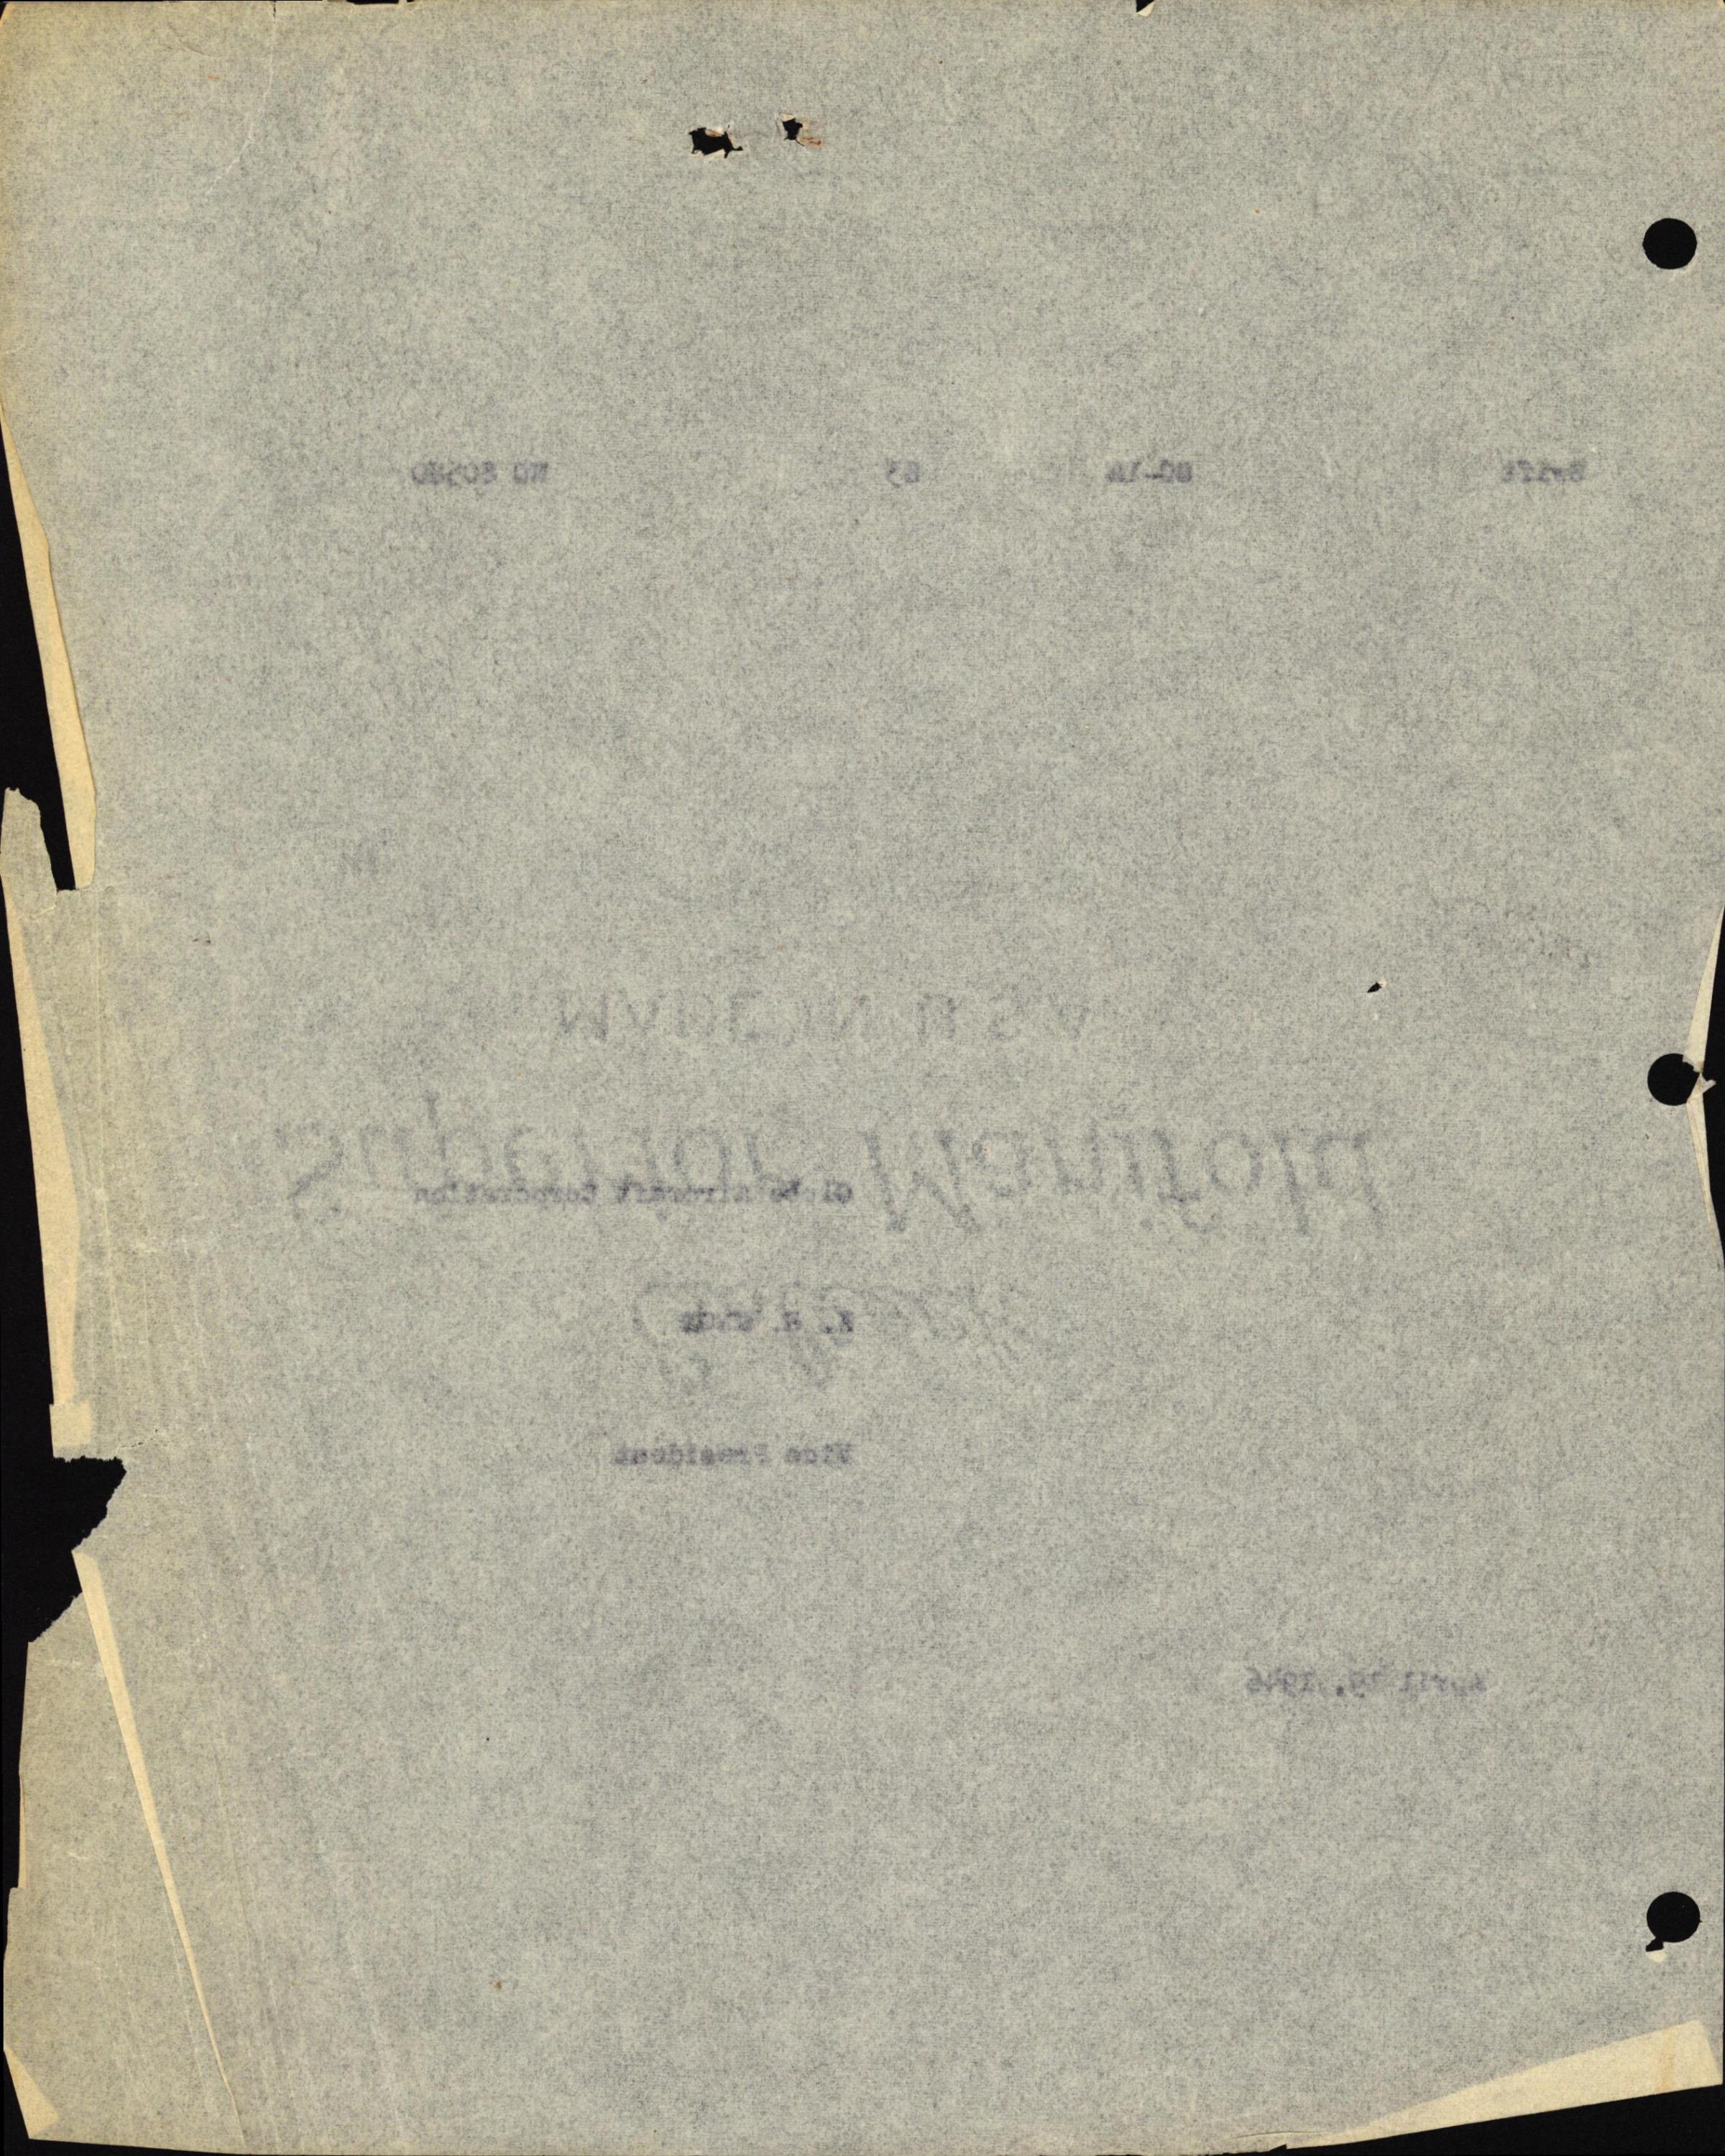 Sample page 6 from AirCorps Library document: Technical Information for Serial Number 83